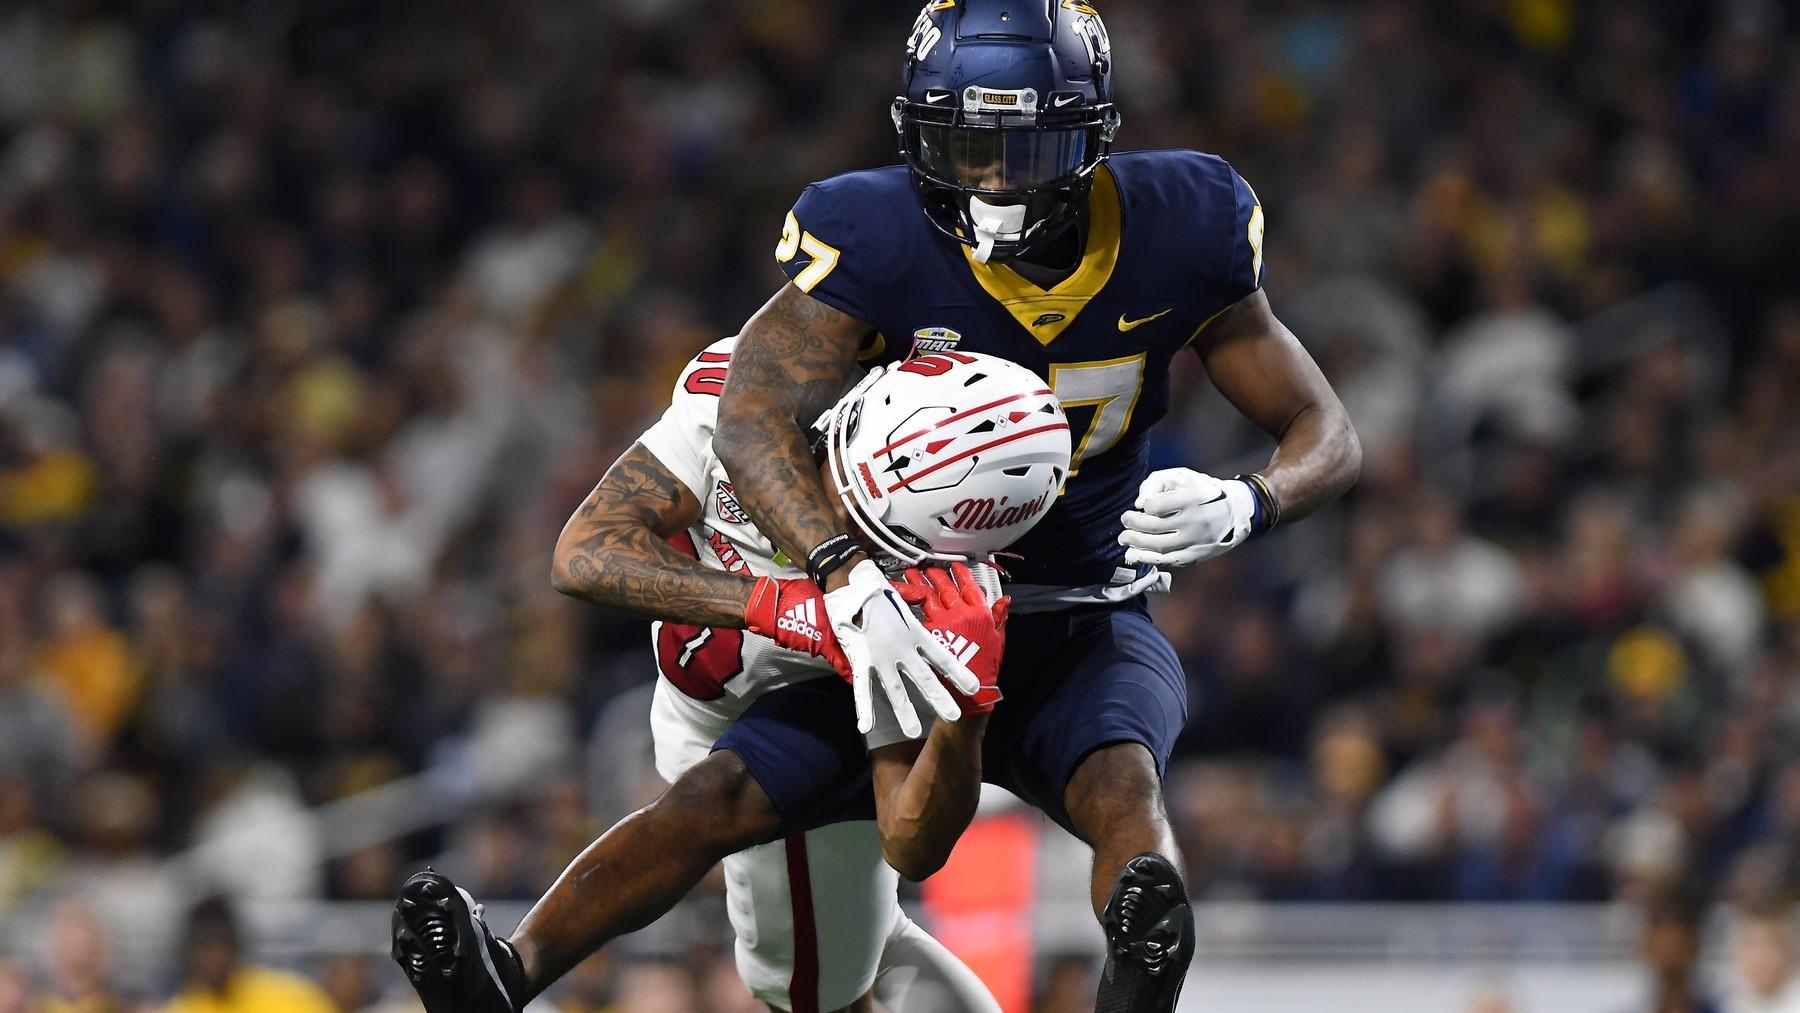 Dec 2, 2023; Detroit, MI, USA; Toledo Rockets cornerback Quinyon Mitchell (27) breaks up a pass intended for Miami (OH) Redhawks wide receiver Gage Larvadain (10) in the third quarter at Ford Field. / Lon Horwedel-USA TODAY Sports